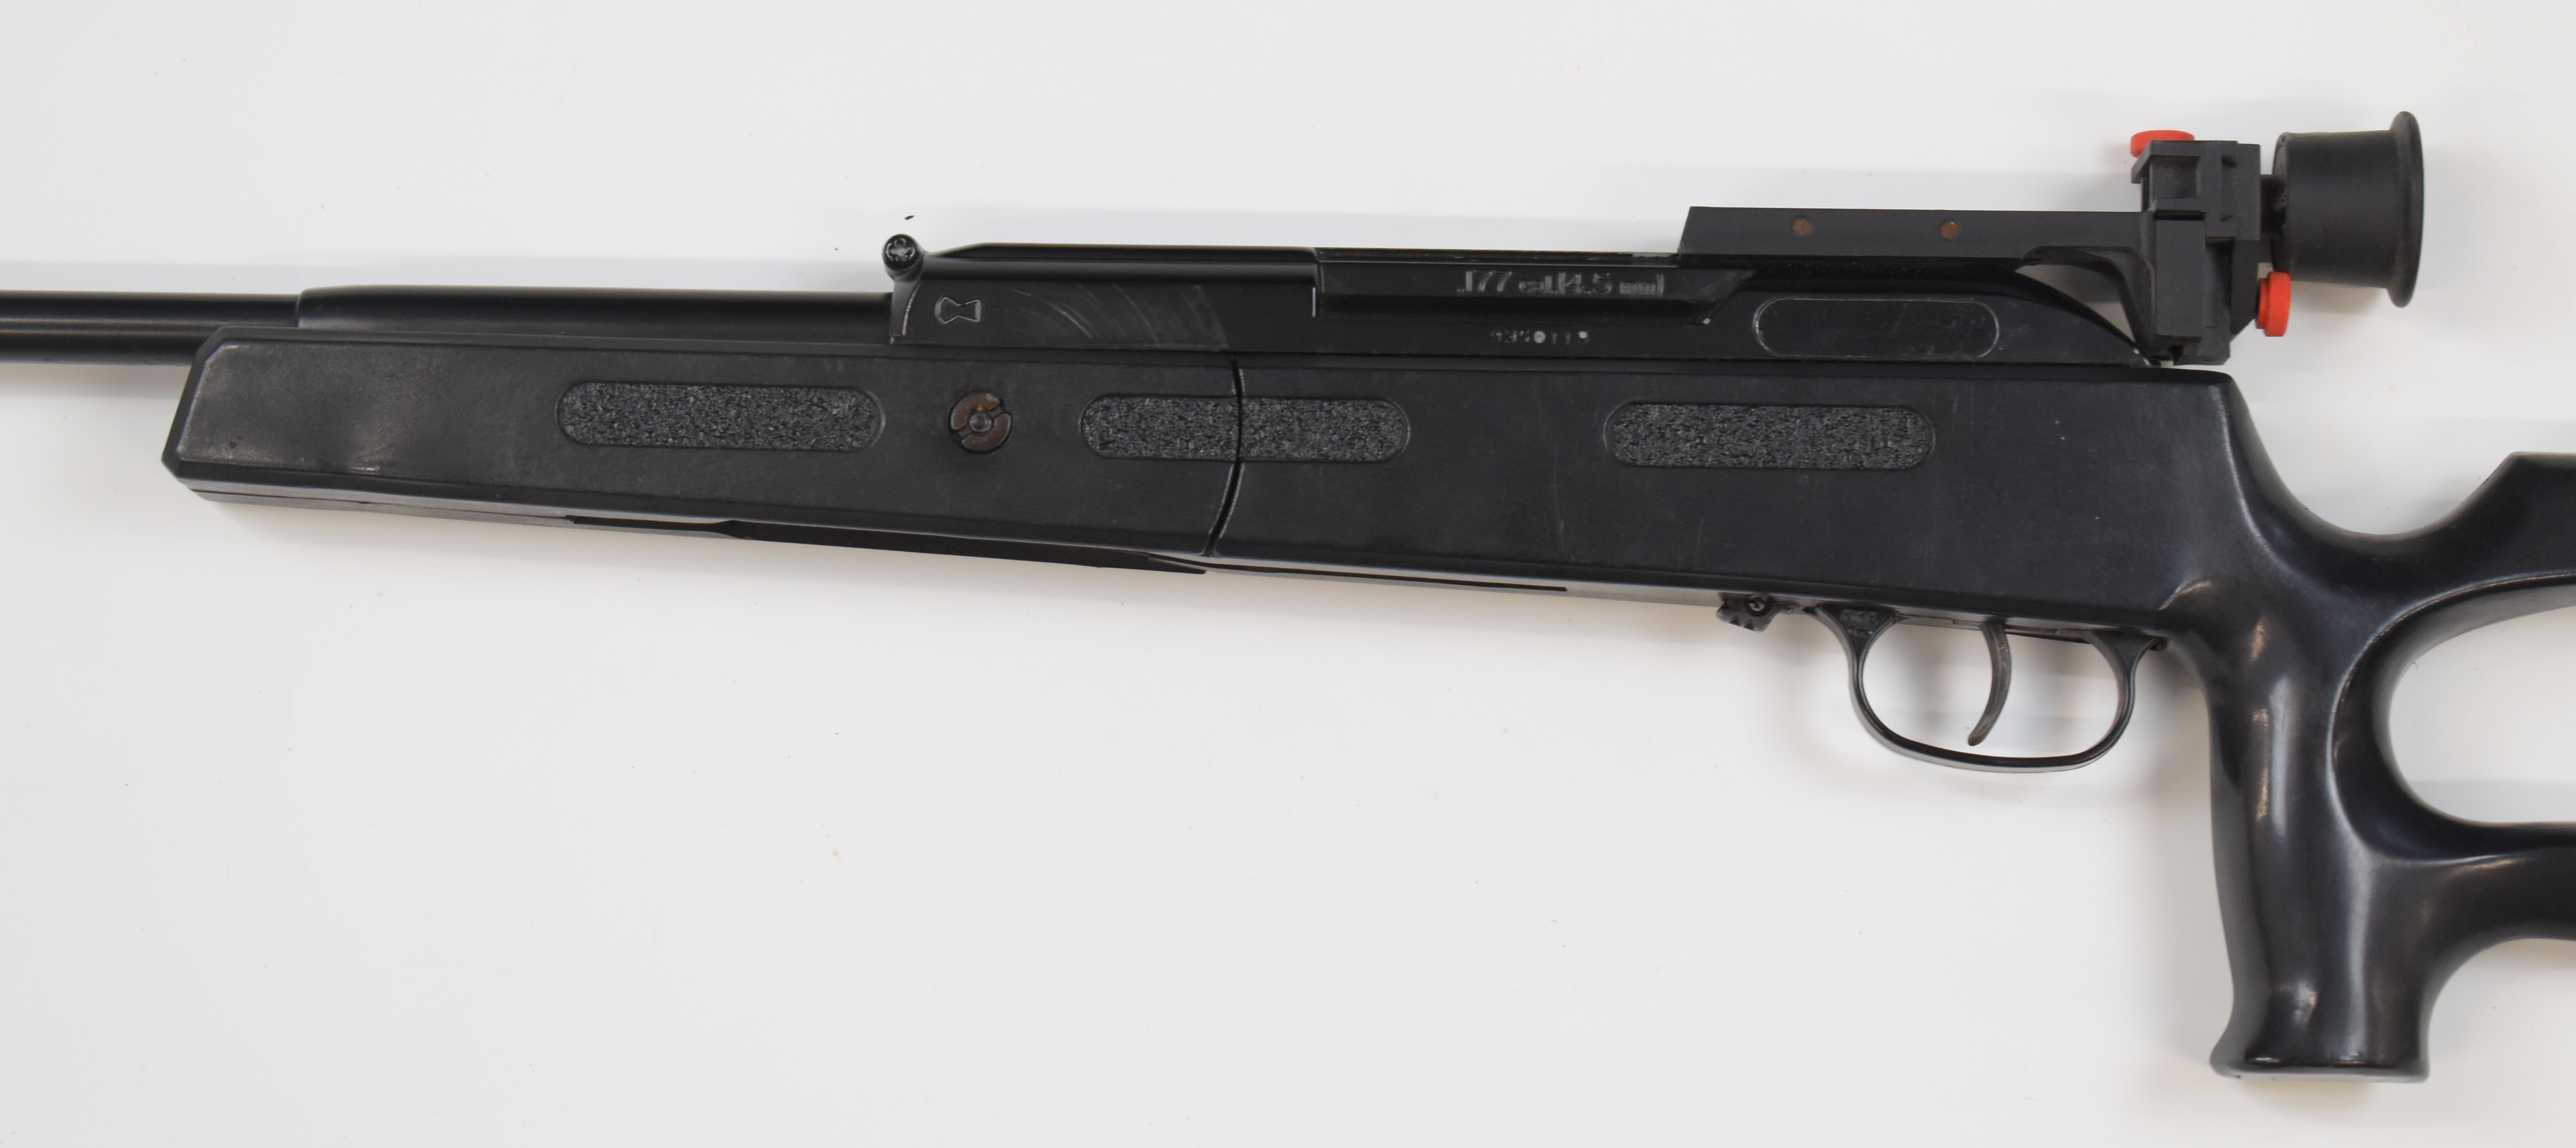 Marksman Model 1790 .177 target air rifle with composite skeleton stock, and adjustable peep-hole - Image 9 of 10